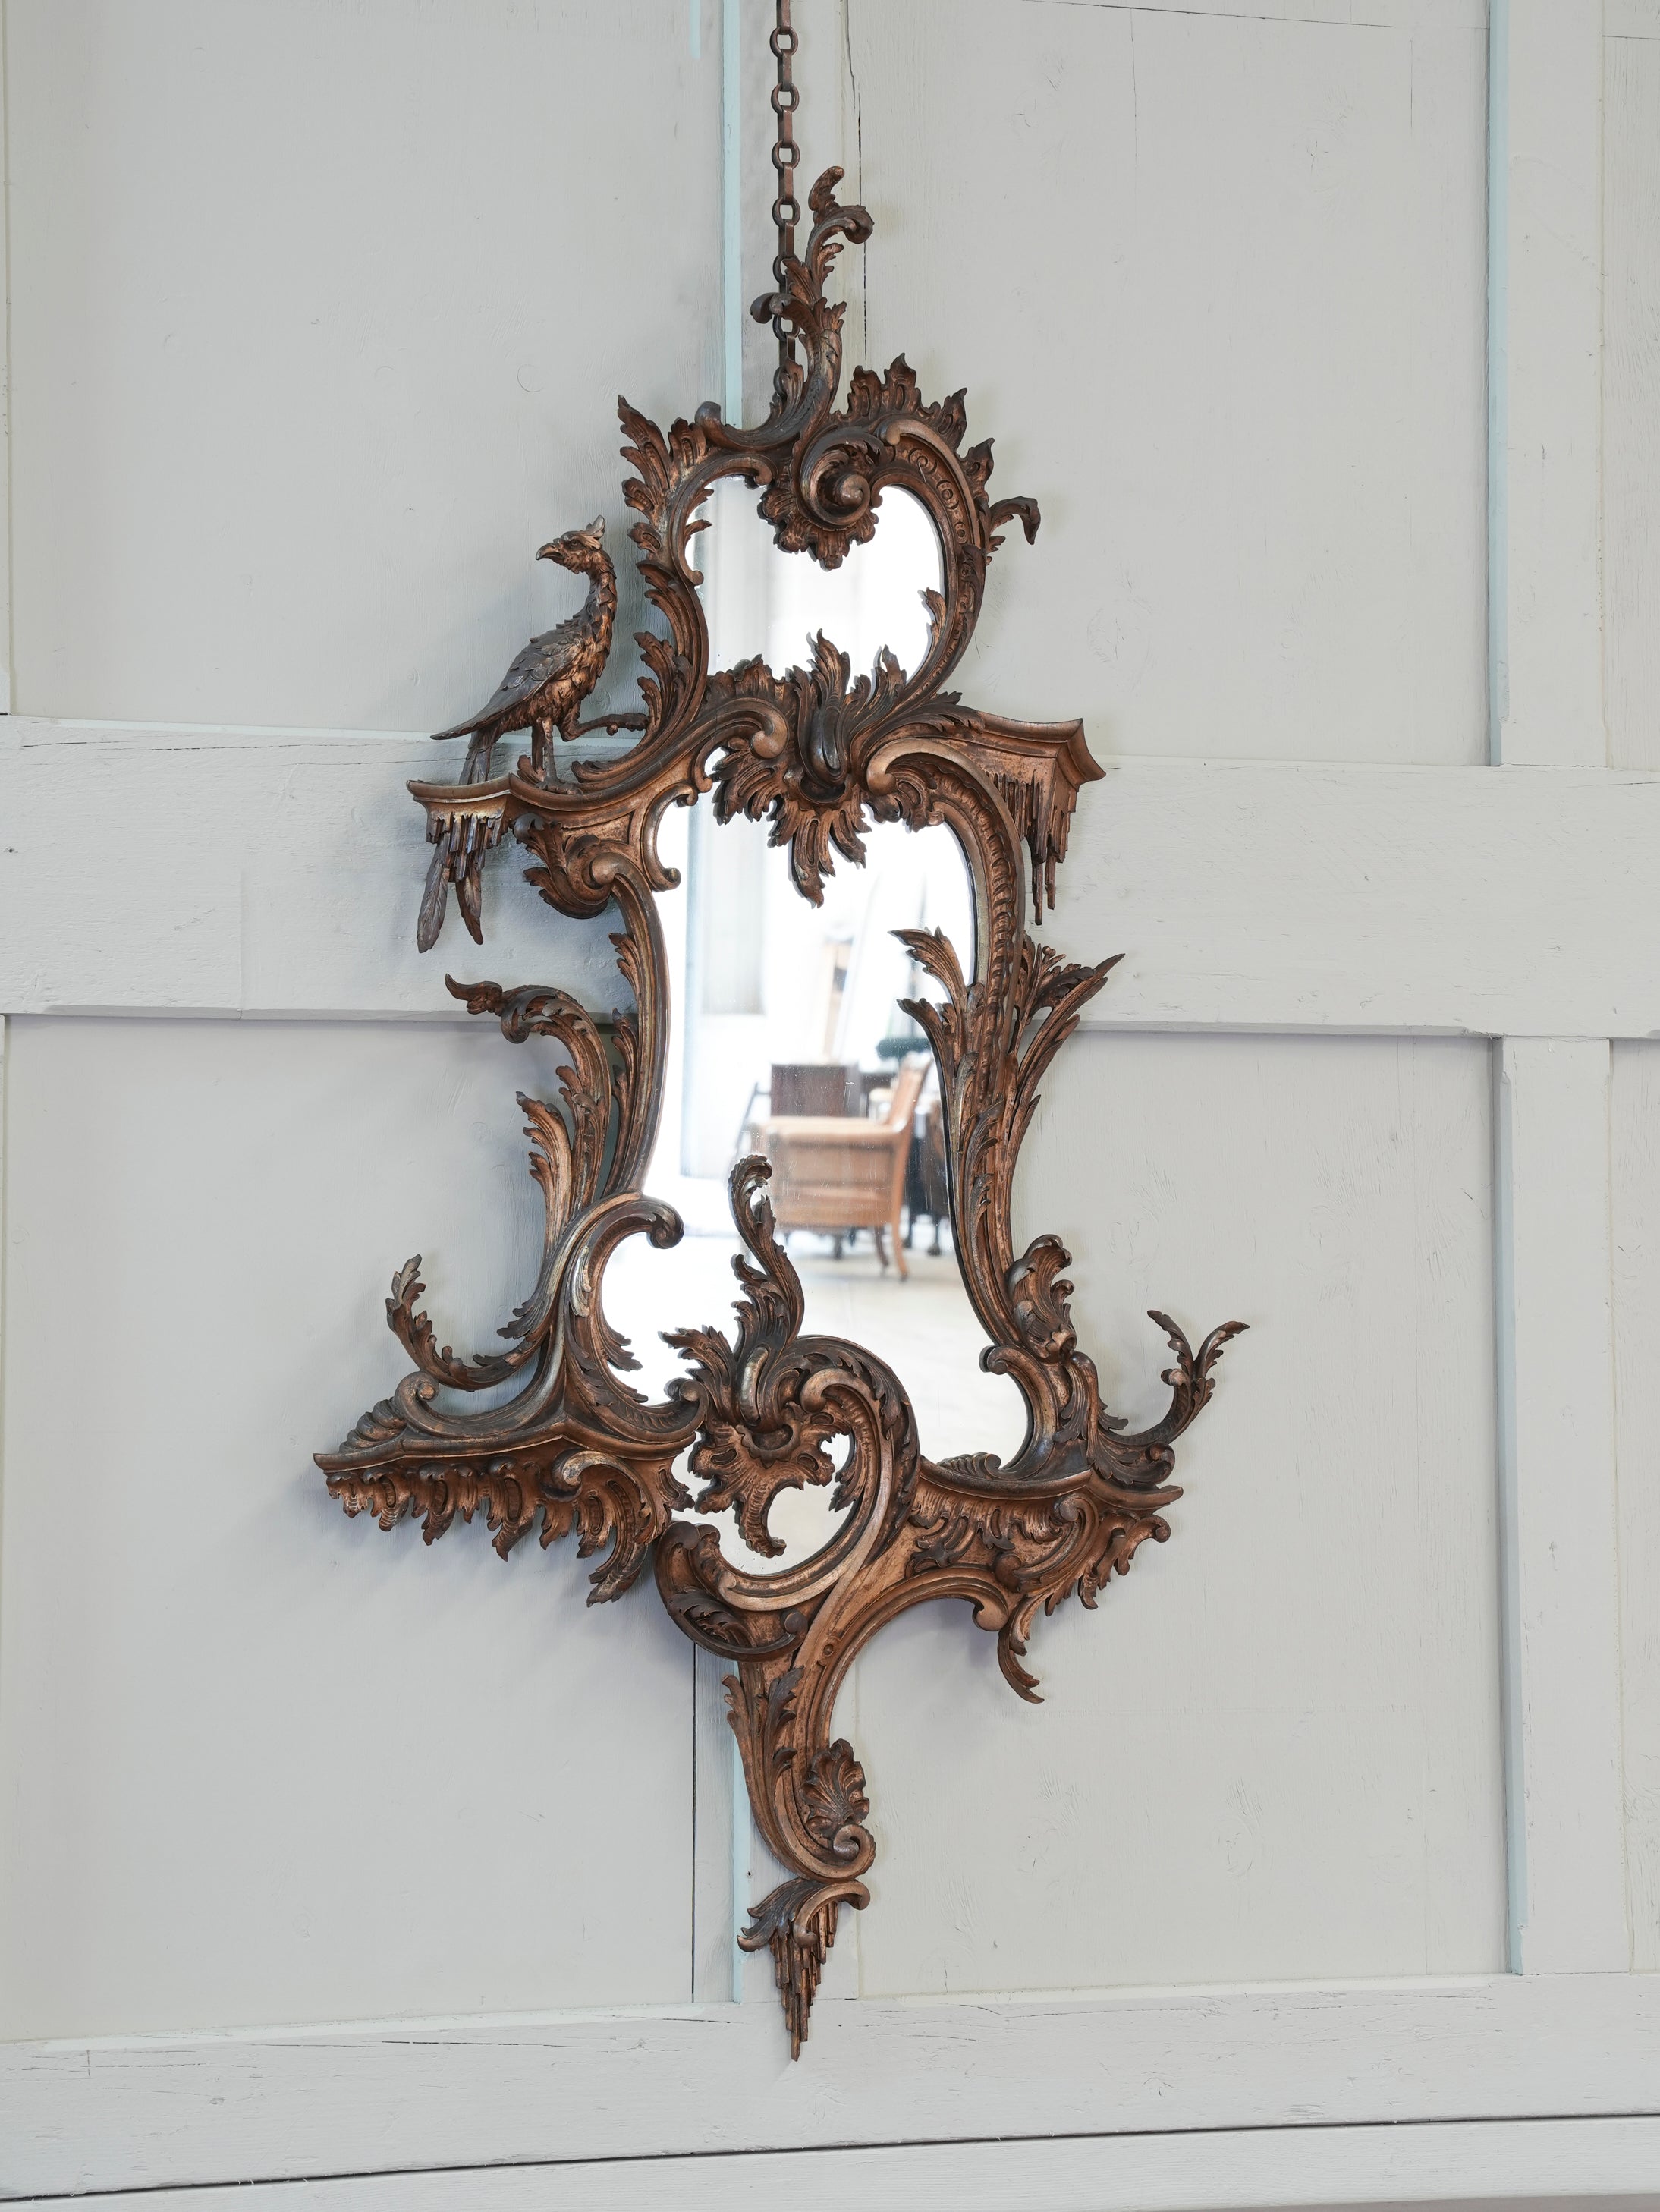 A 19th Century Gilt Wood Mirror in the manner of Thomas Johnson